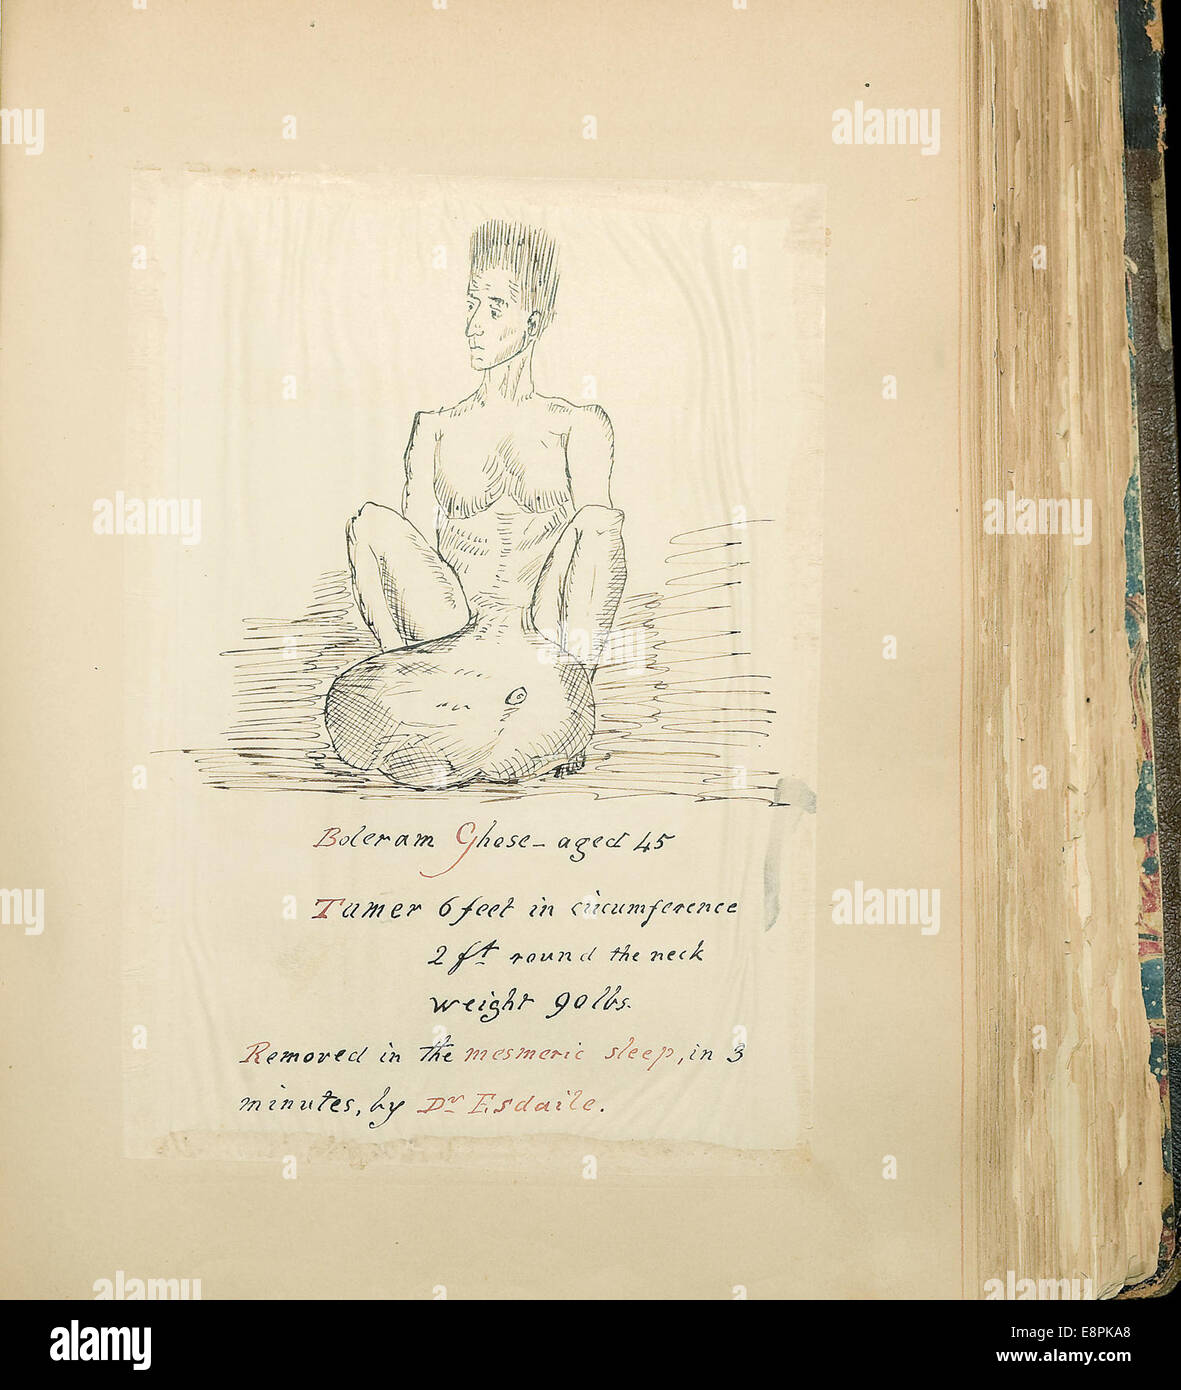 Appears In: Theodosius Purland, collection of materials on mesmerism   Image Description: Image of a drawing of a man, named Bol Stock Photo